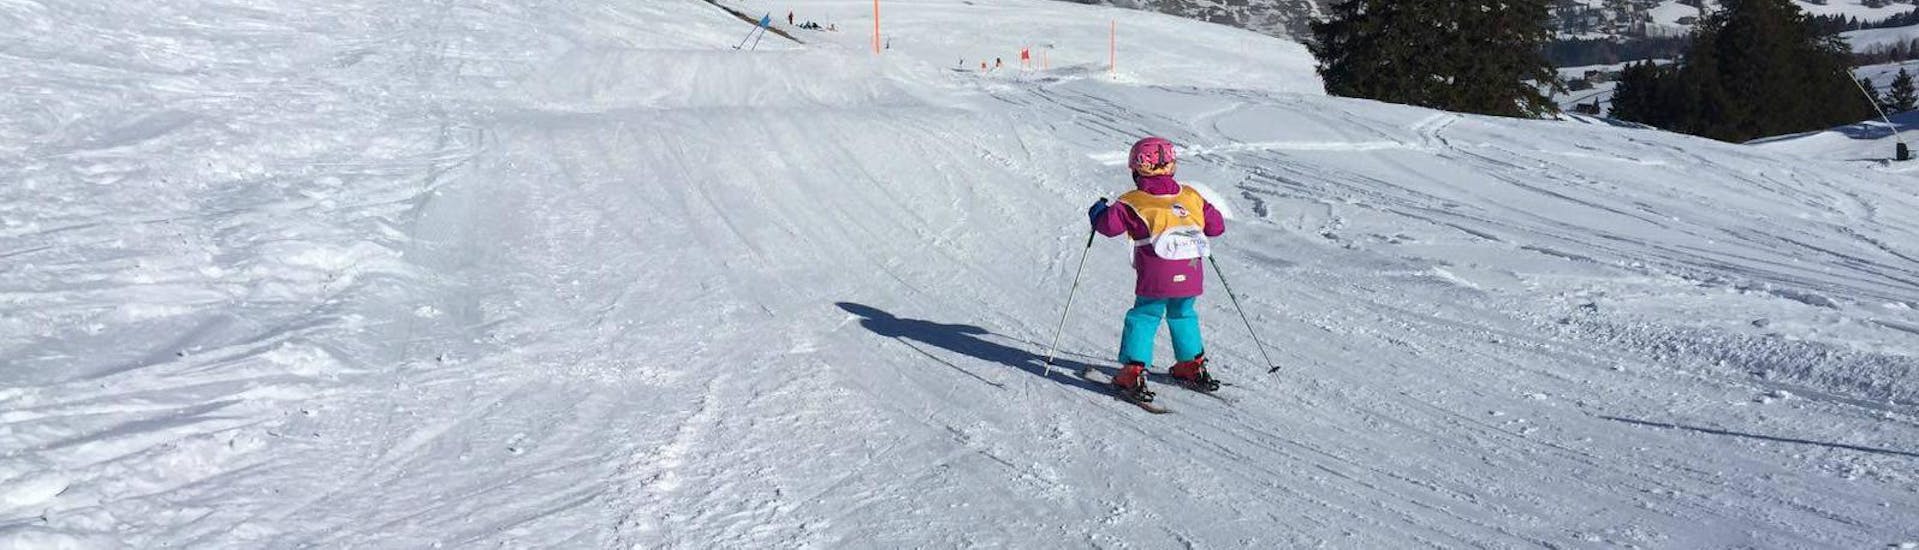 A young skier ist testing her new skiing skills during the Private Ski Lessons for Kids - All Levels organized by Swiss Ski School Chäserrugg.